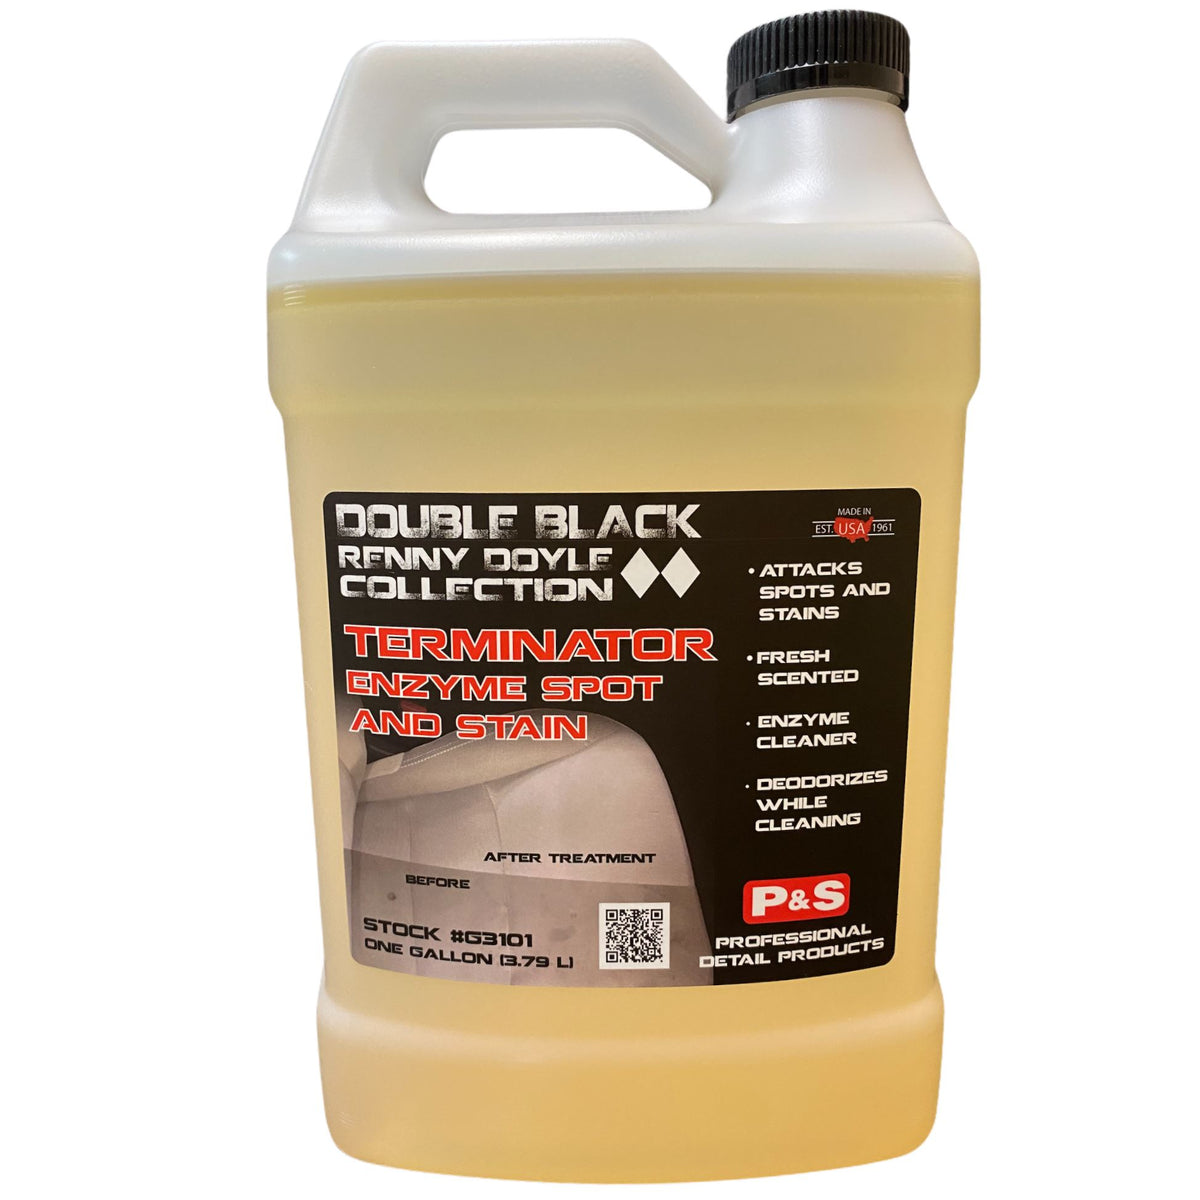 P&S Terminator Enzyme Spot And Stain Remover, Pint, Gallon, Pint+ Gallon